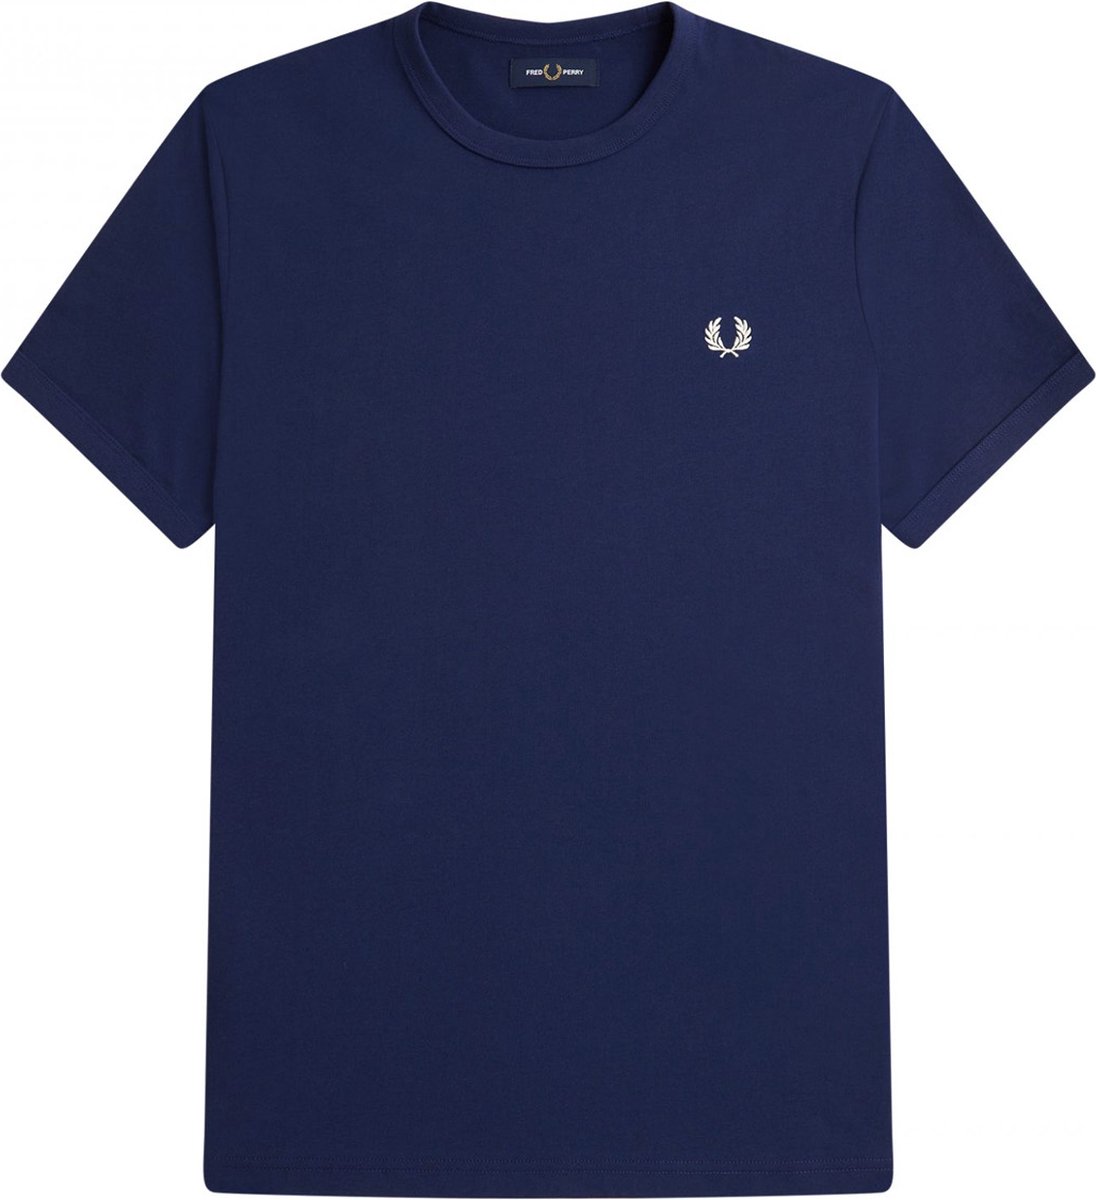 Fred Perry - Ringer T-Shirt - Donkerblauw T-Shirt-XXL